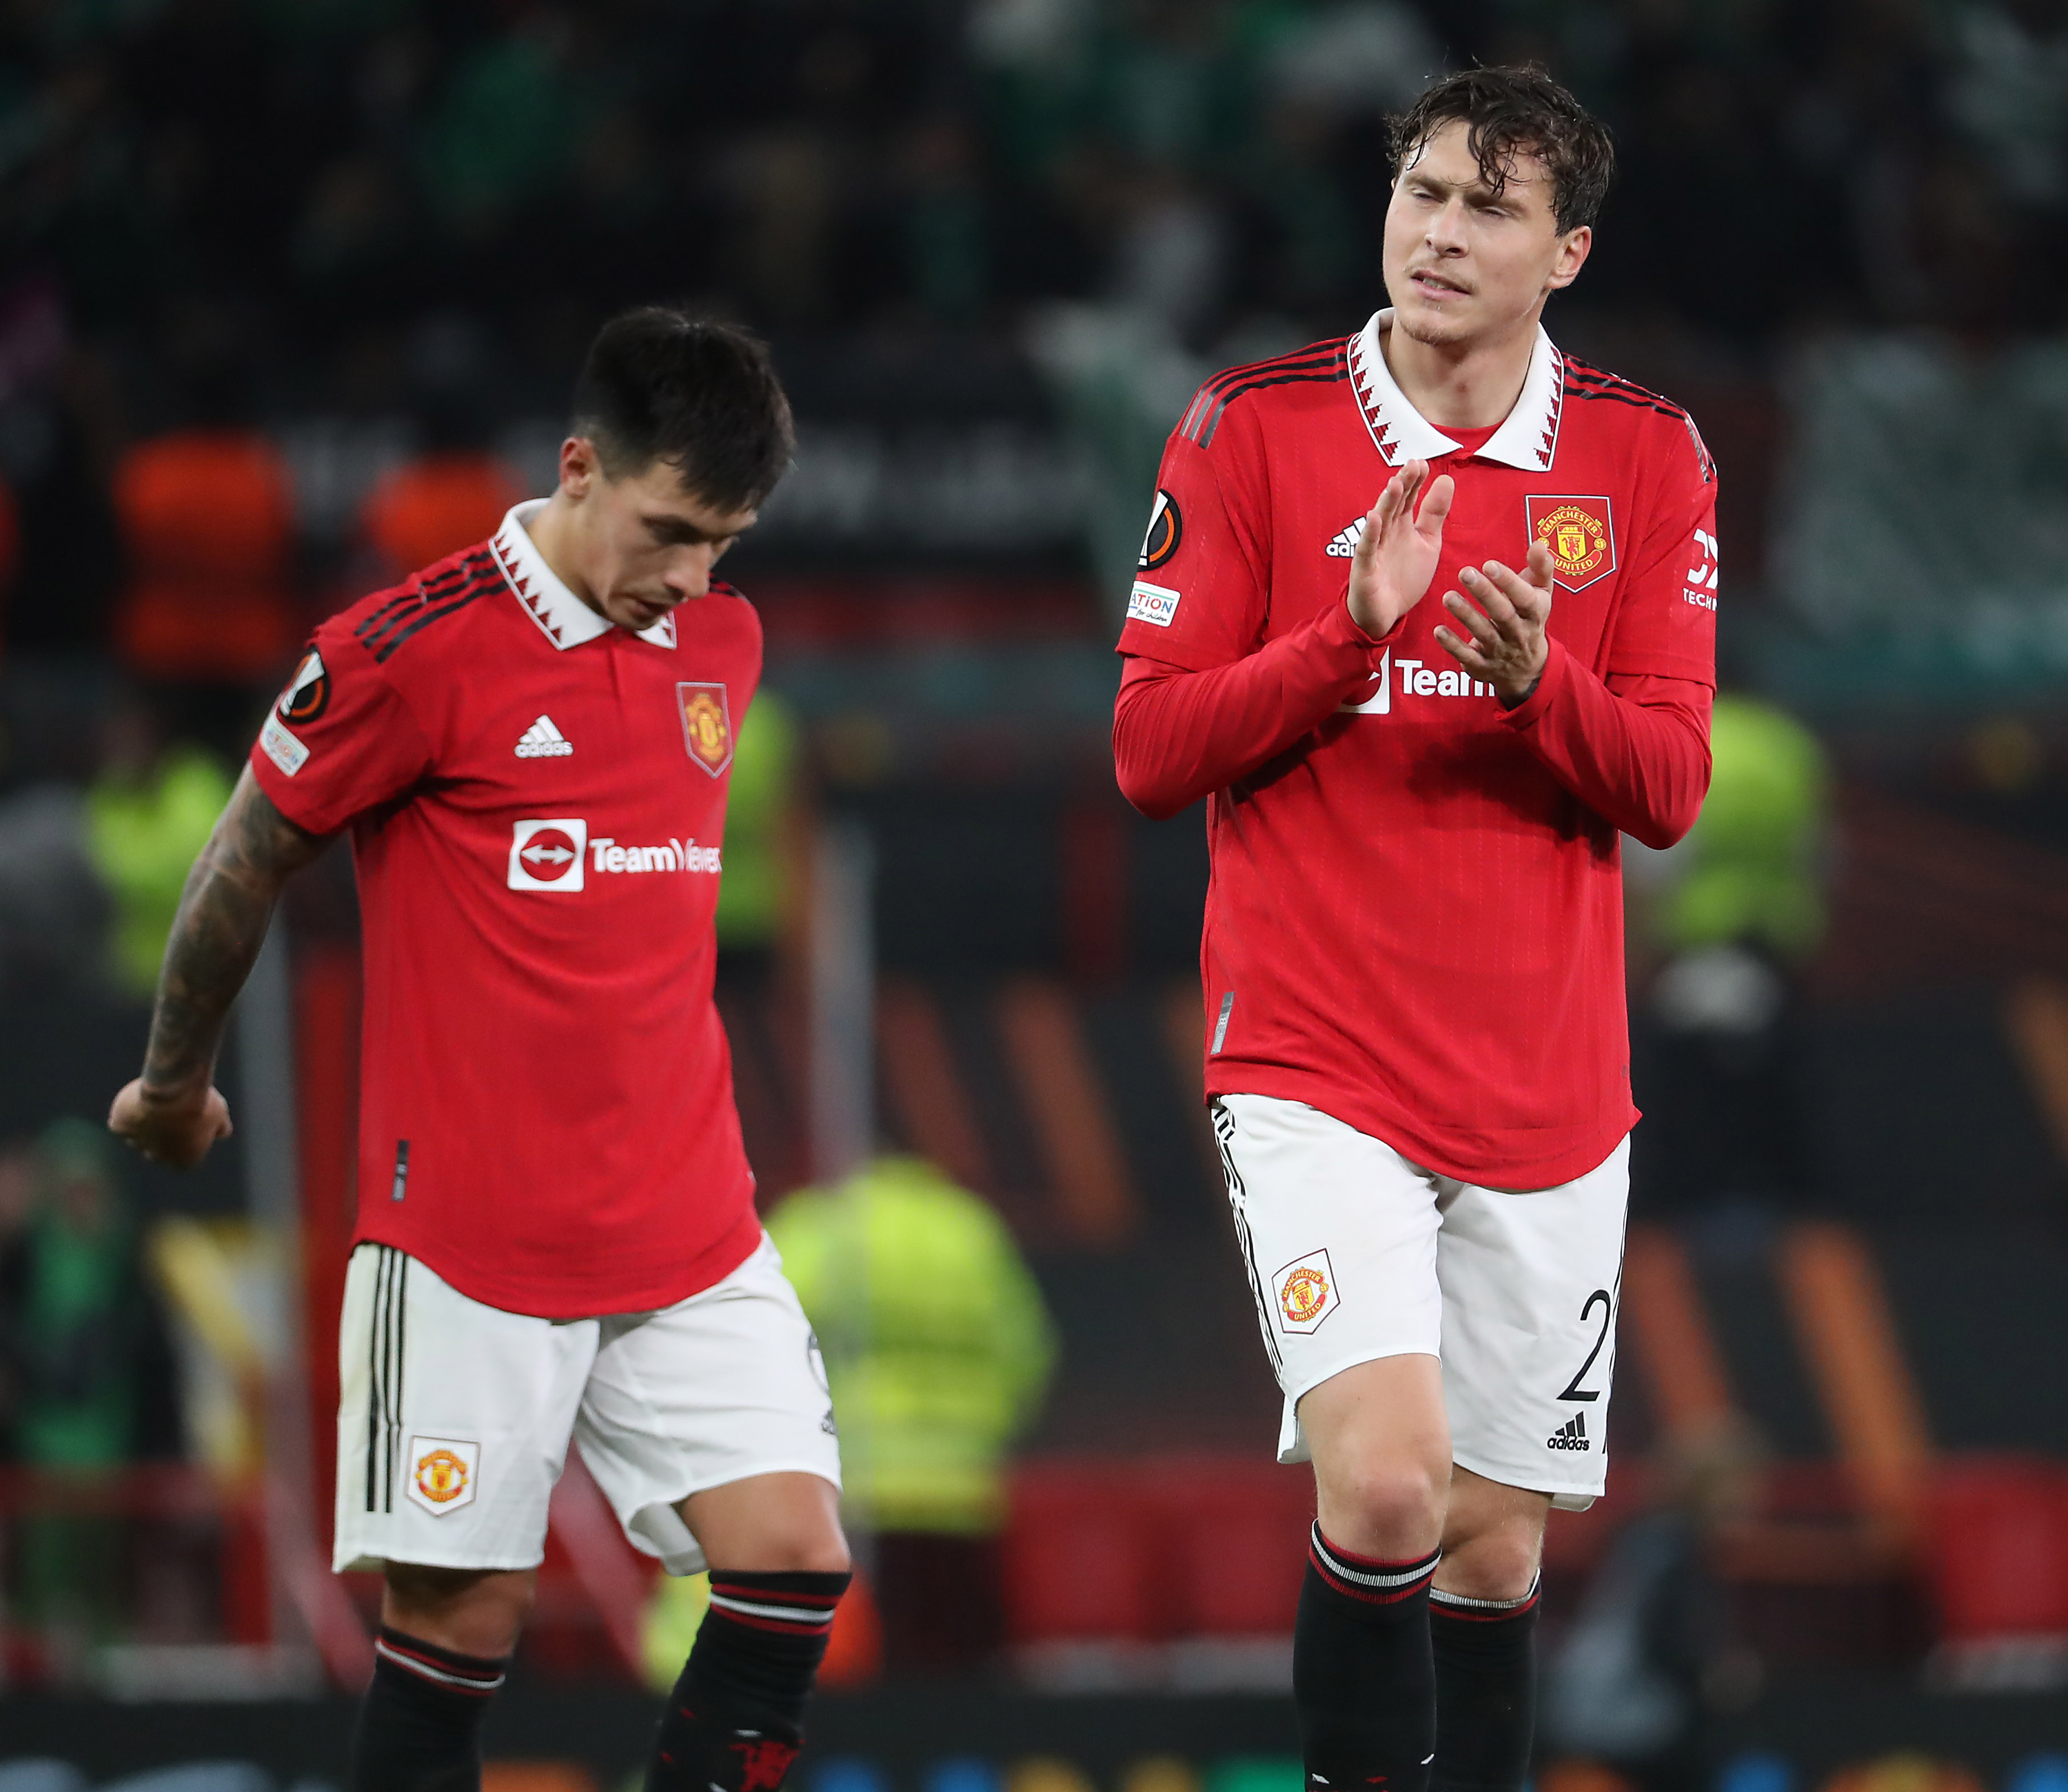 Lisandro Martinez and Victor Lindelof also had a falling out